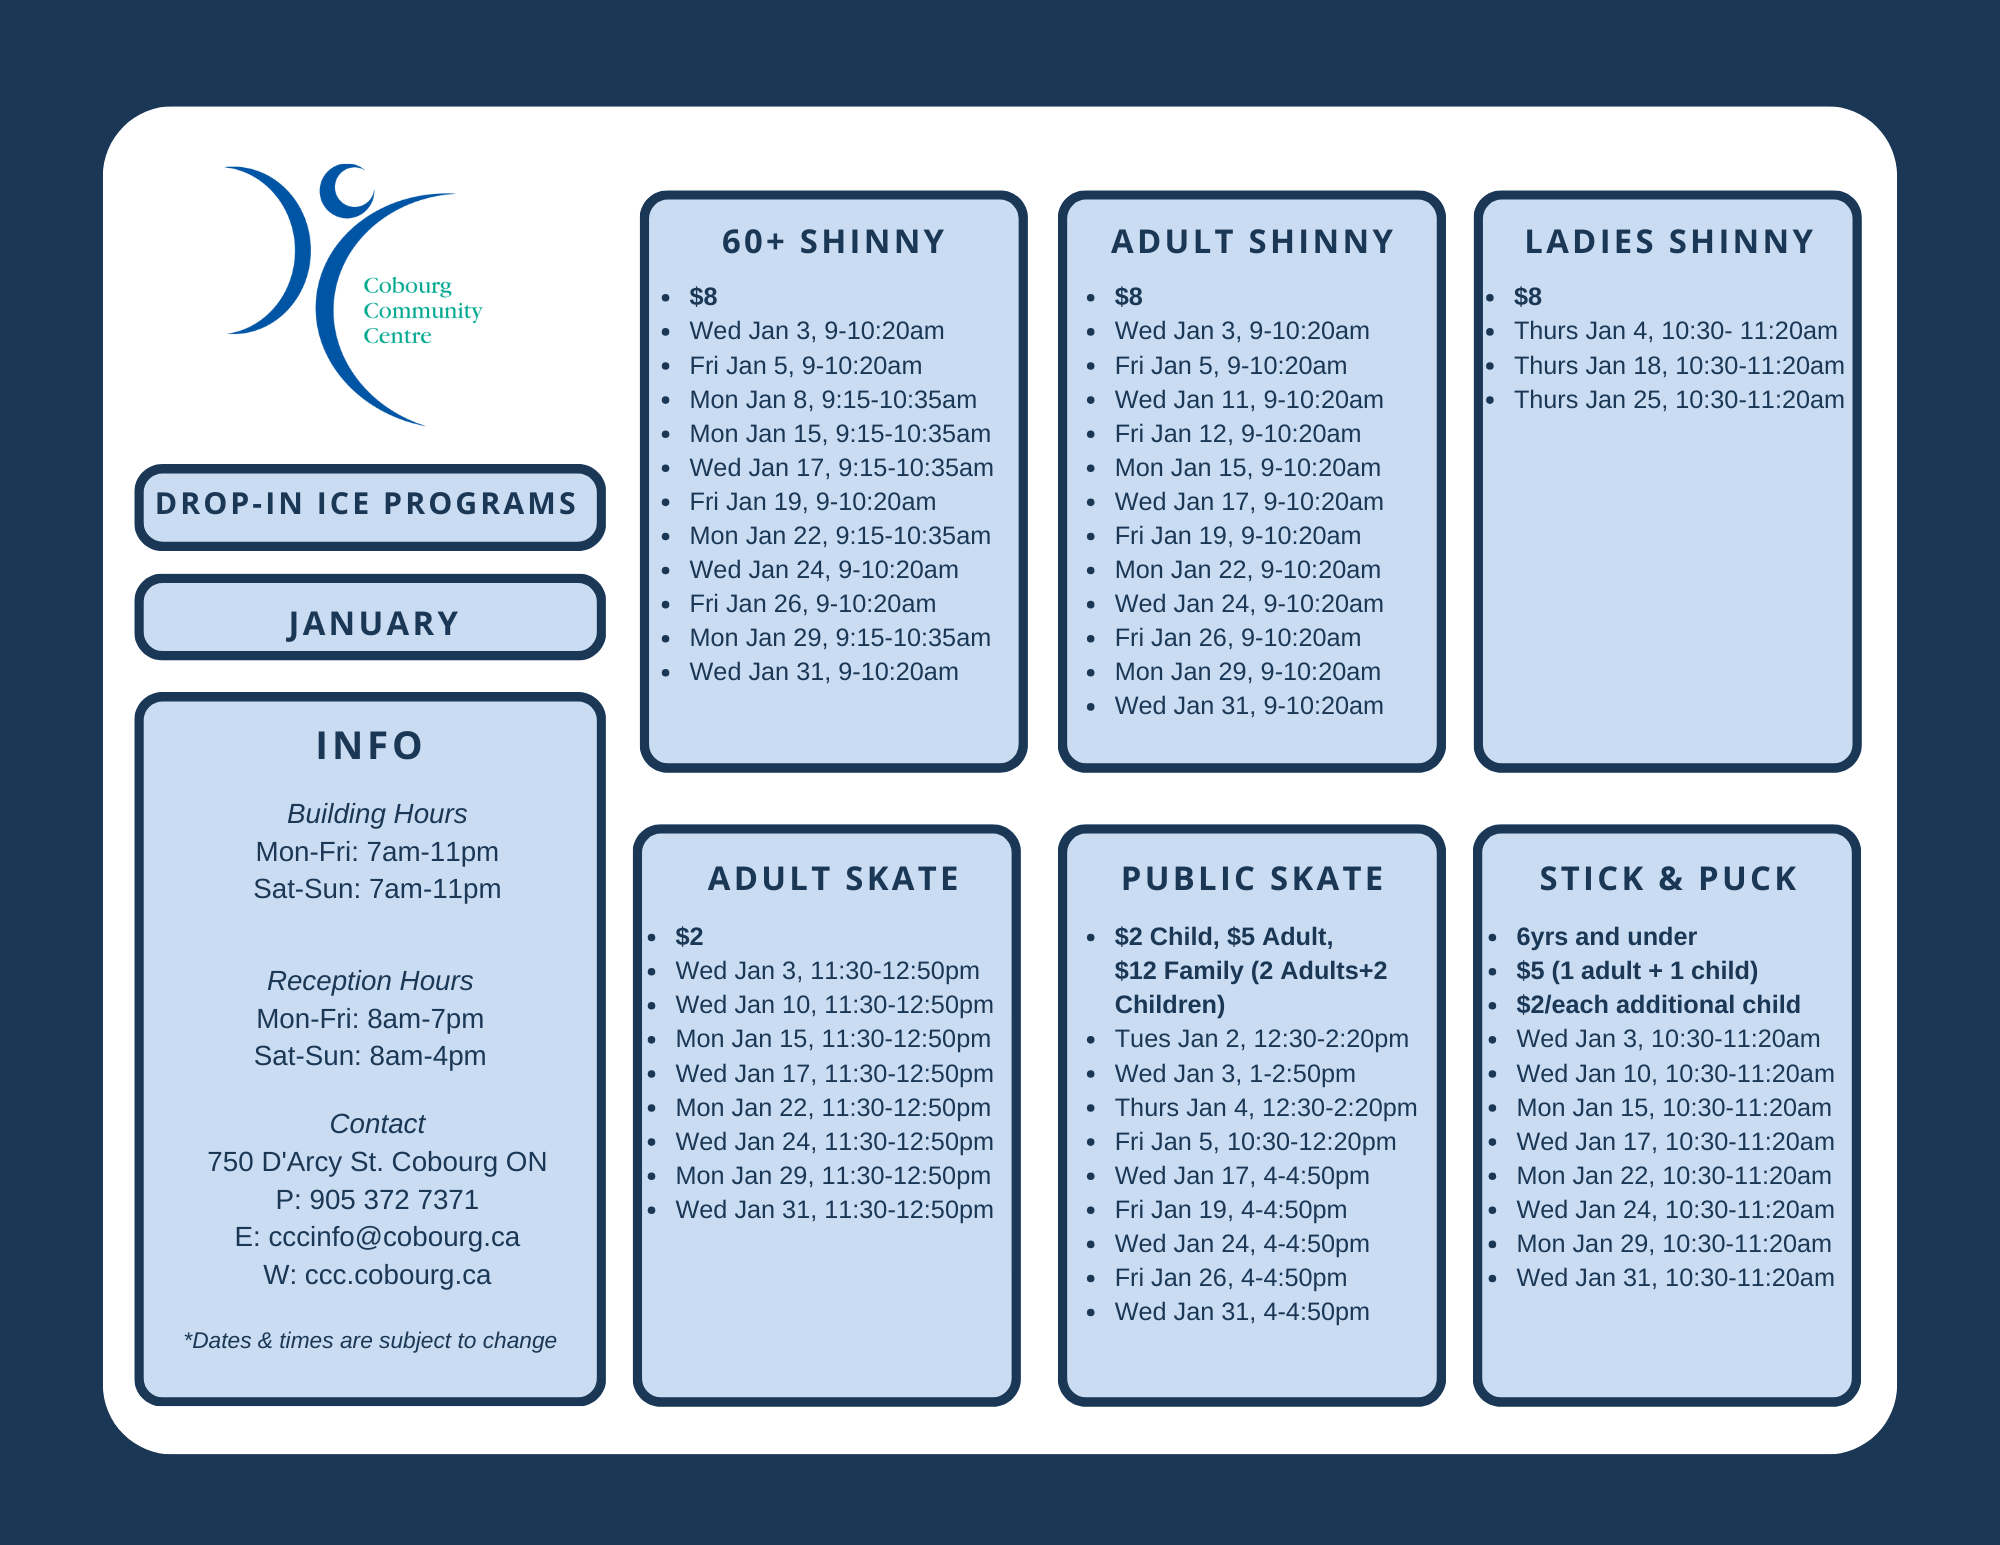 Schedule of Ice programs in January